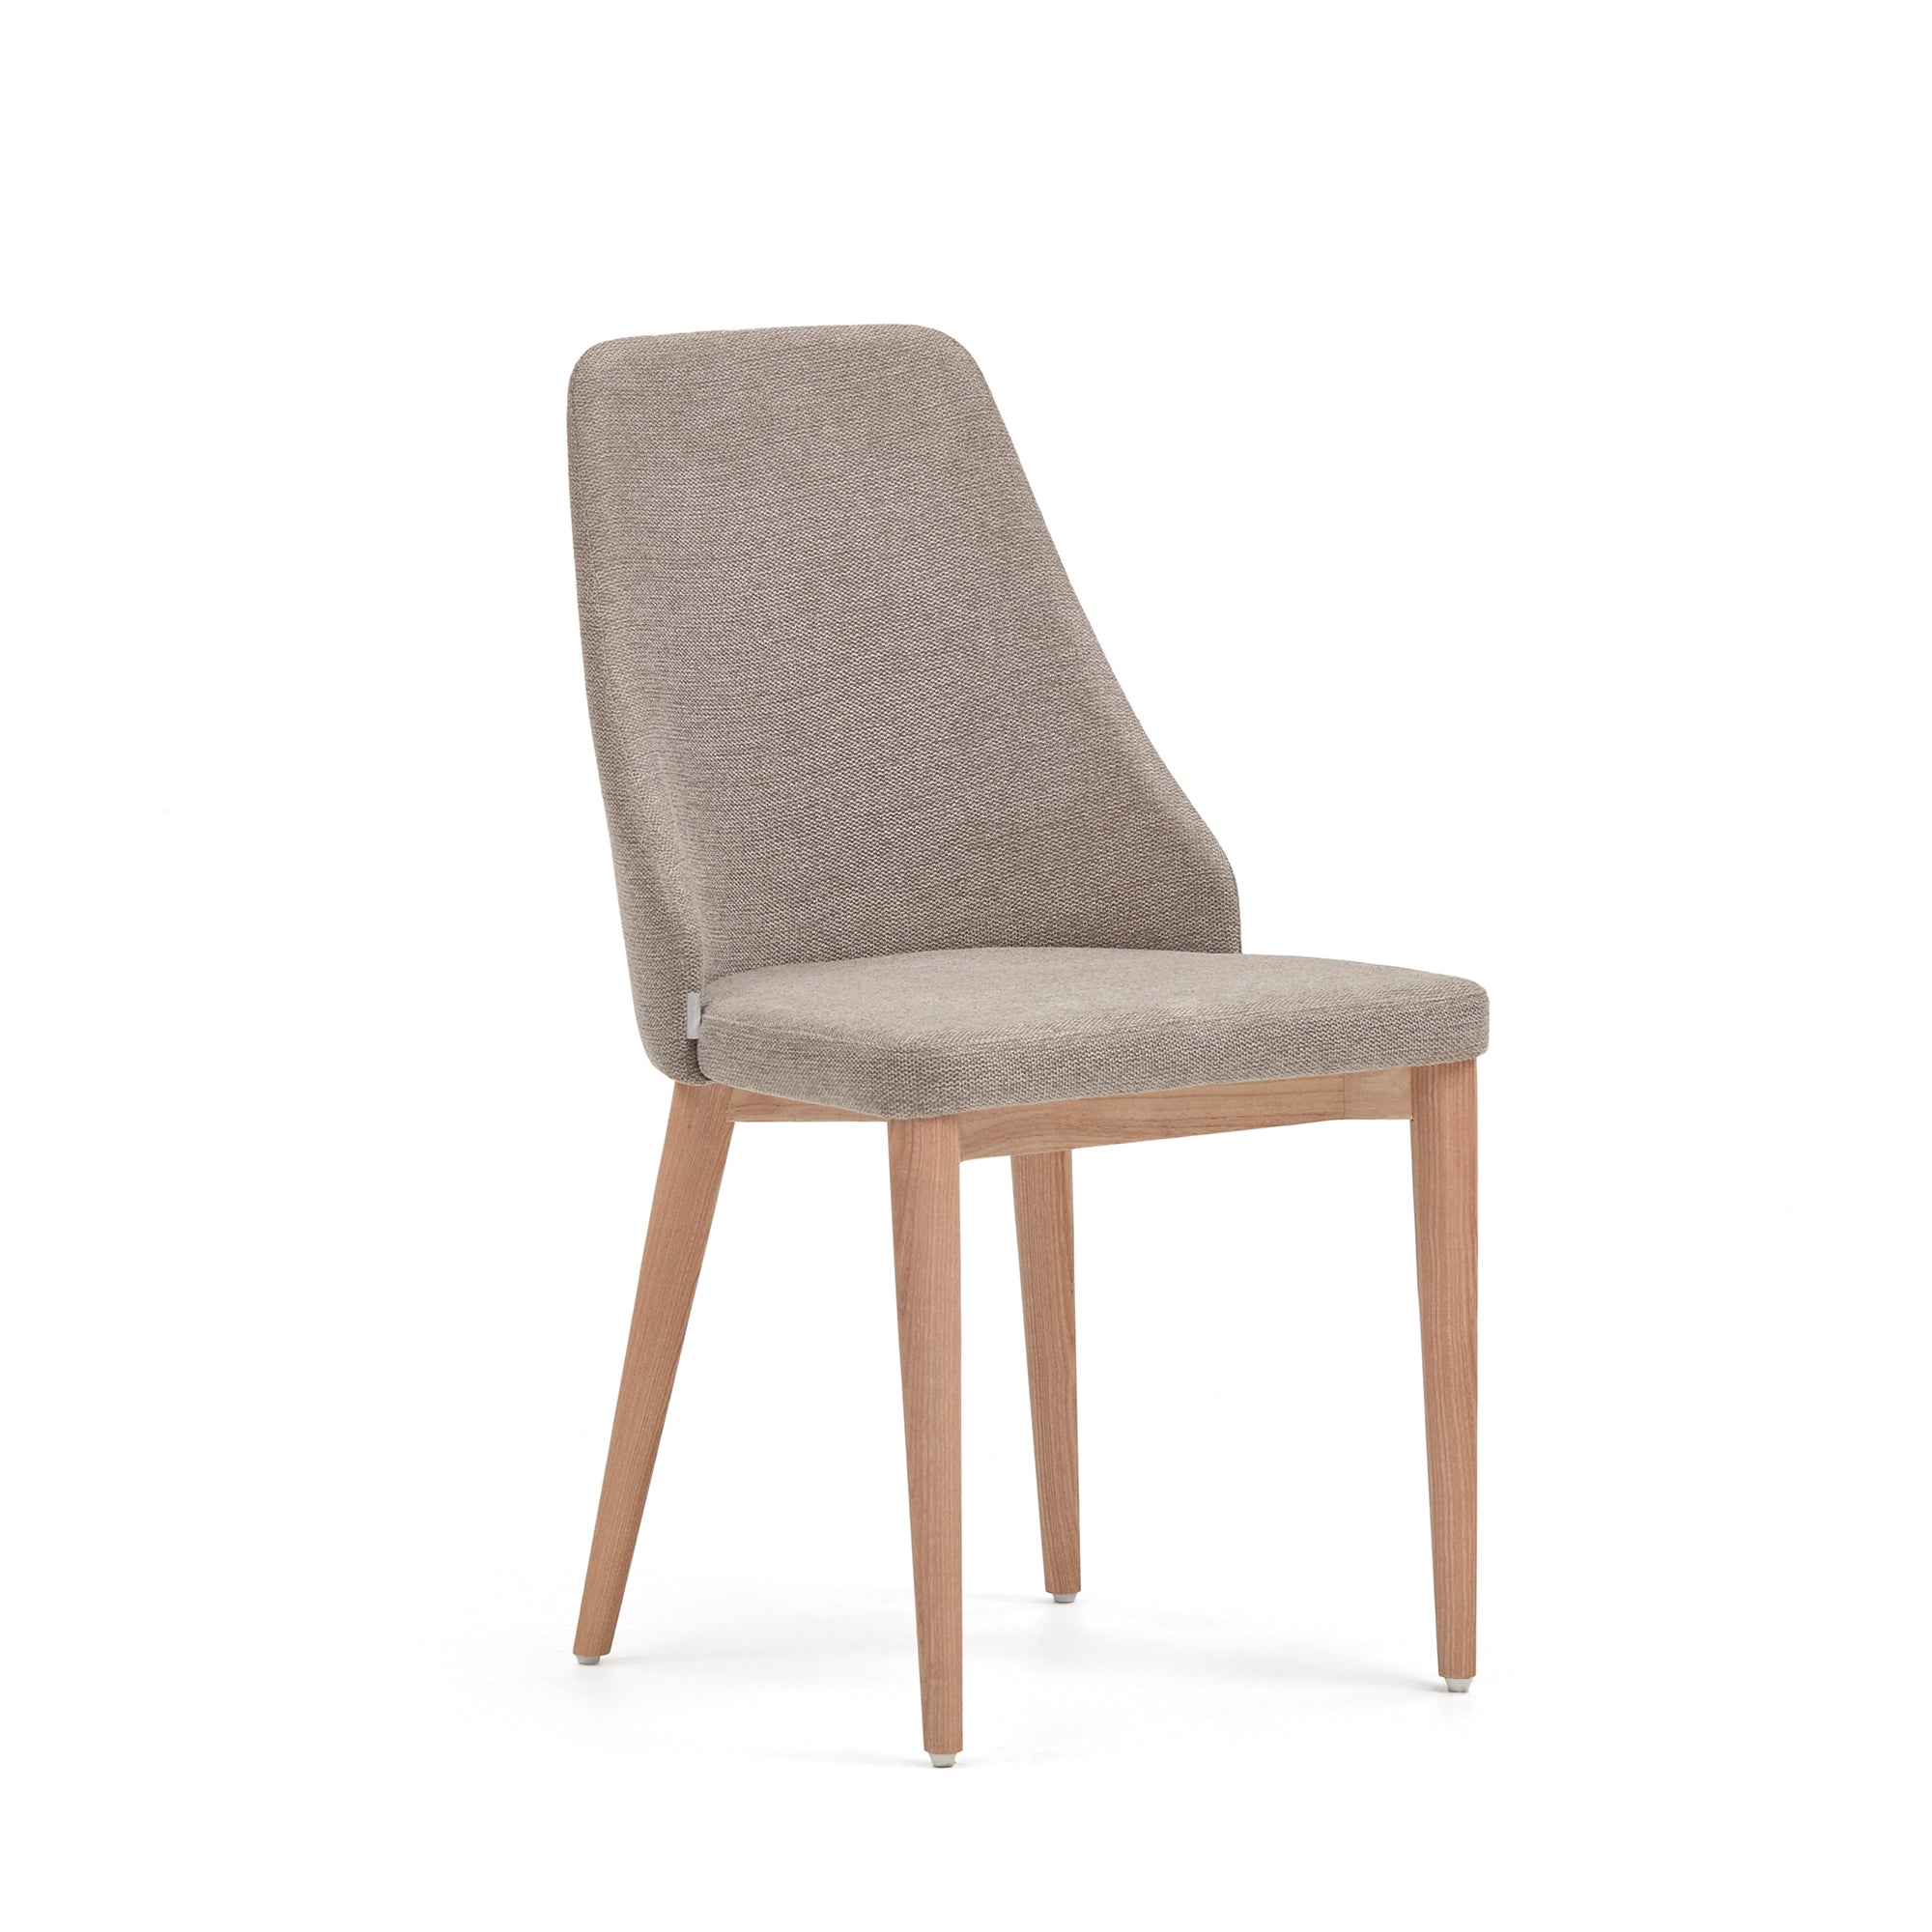 Rosie chair in brown chenille with solid ash wood legs in a natural finish